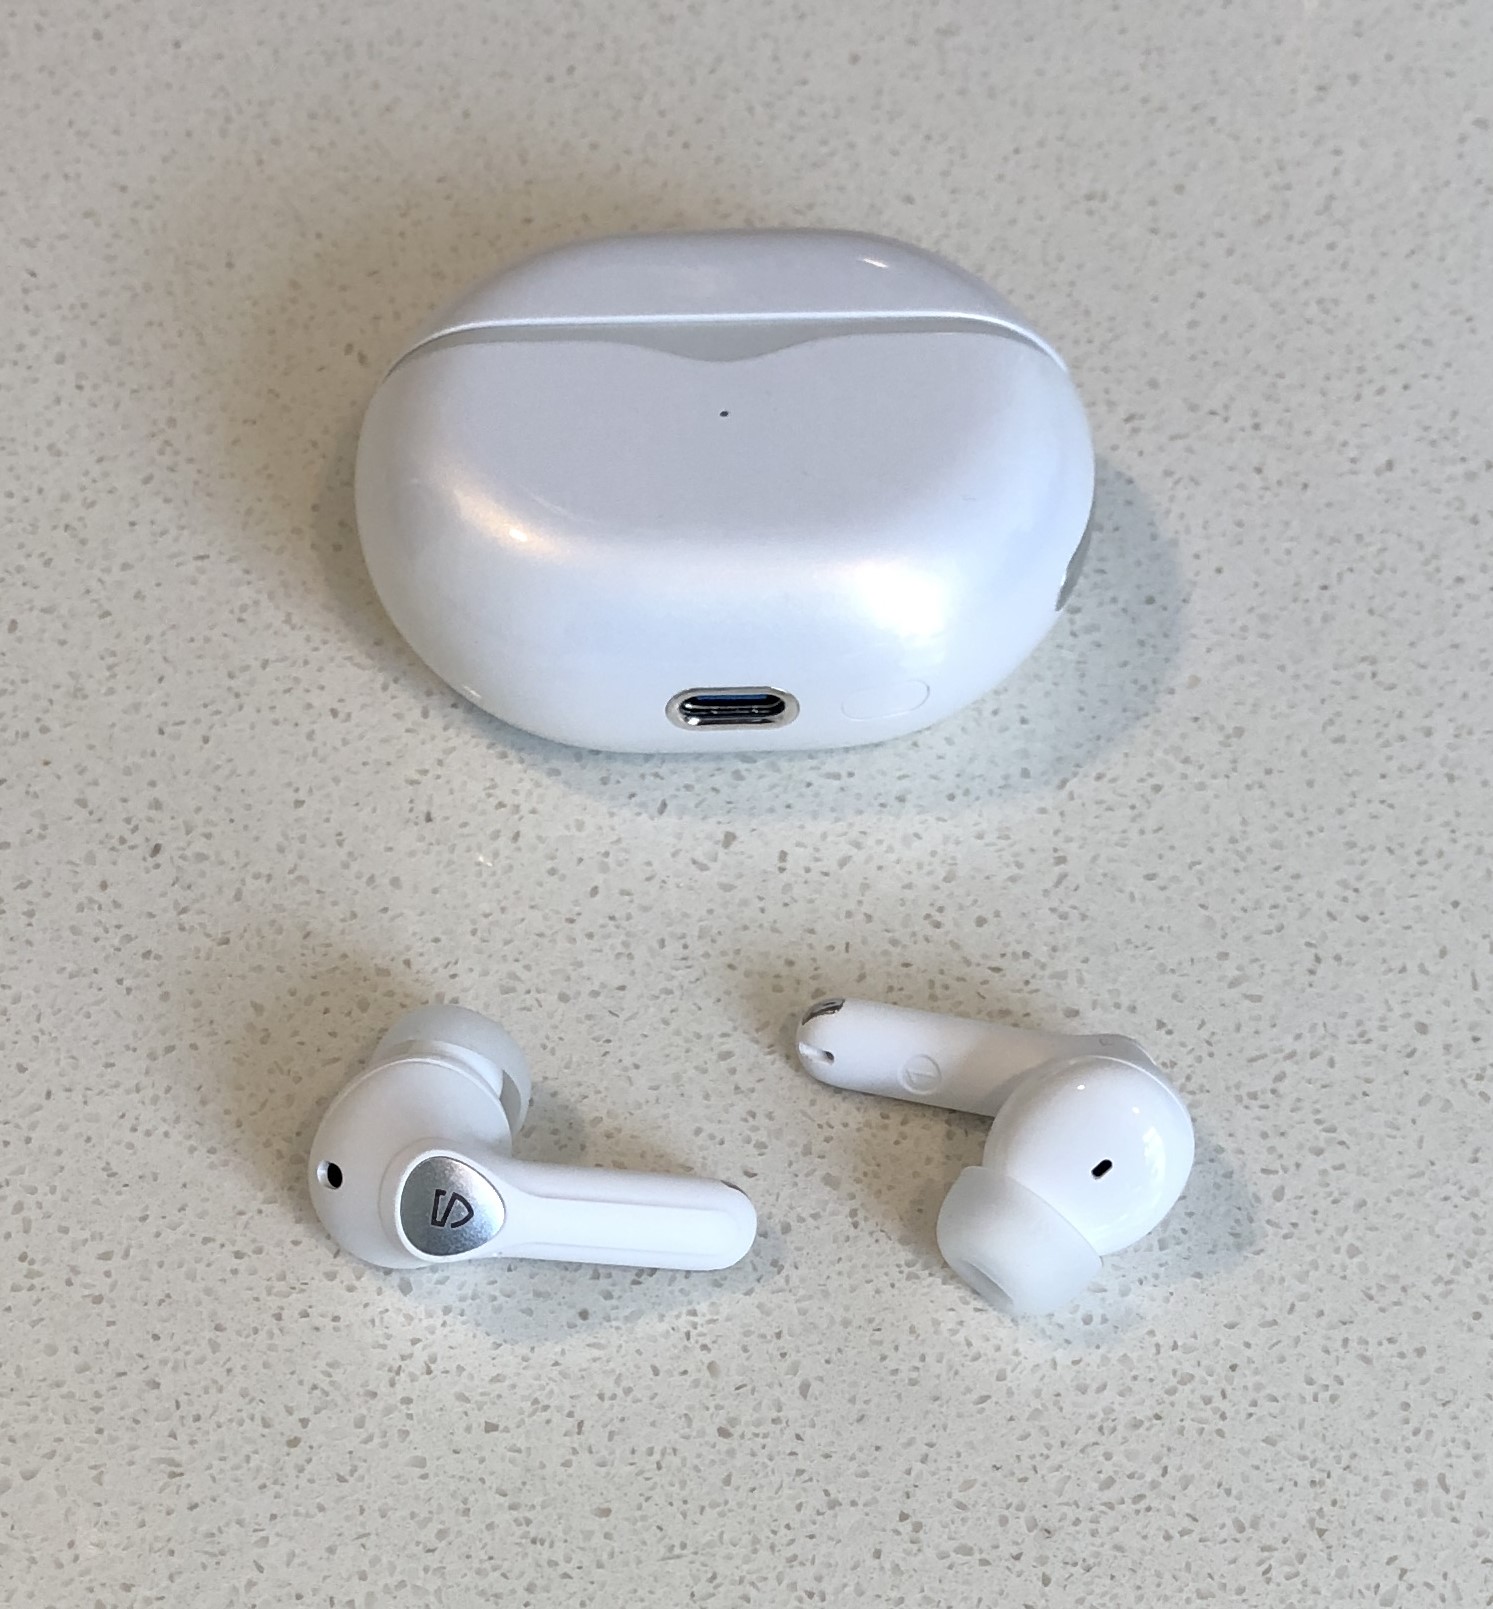 SoundPEATS Air4 Pro wireless earbuds and case